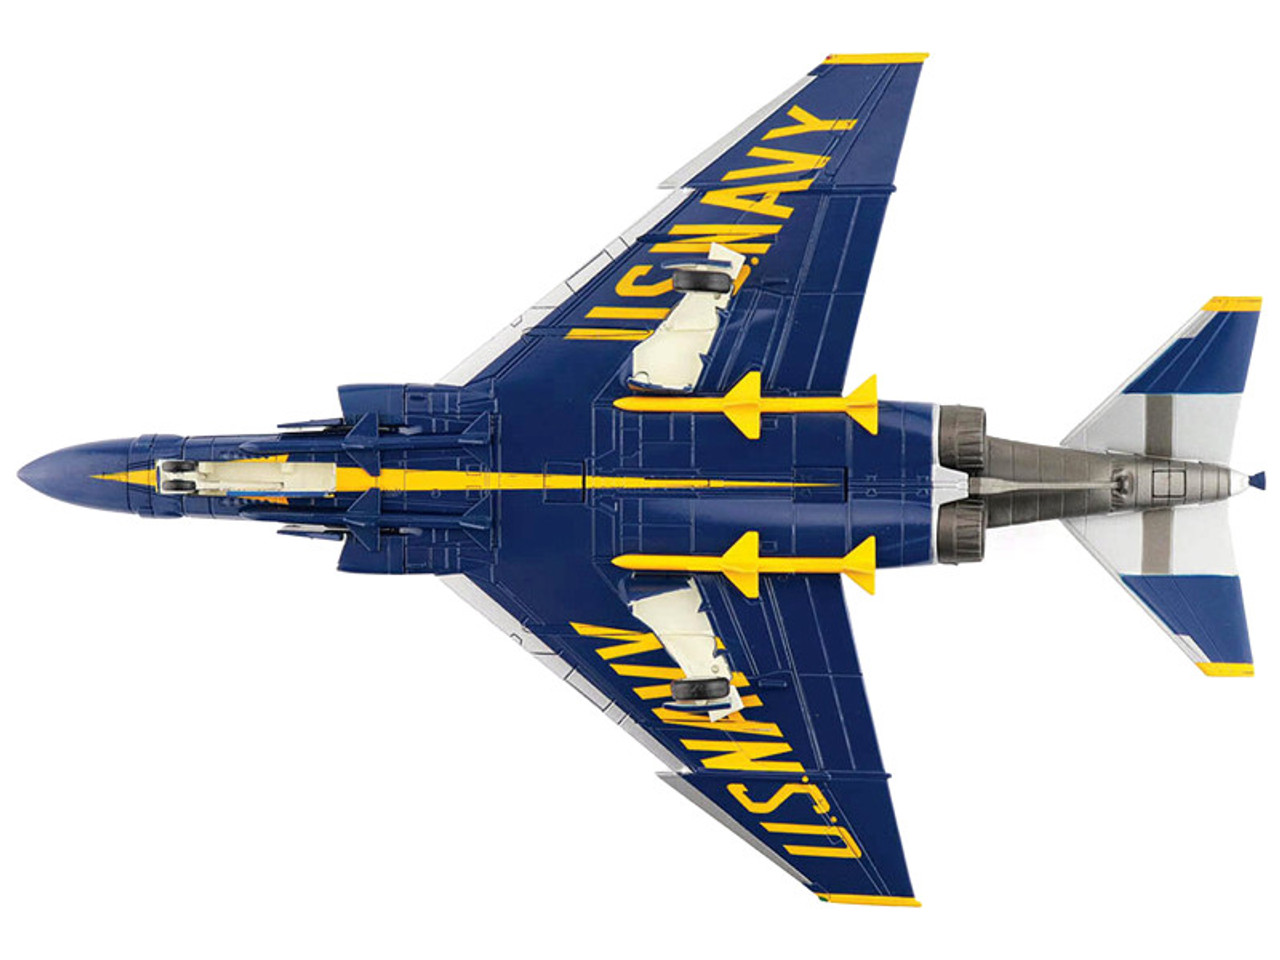 McDonnell Douglas F-4J Phantom II Fighter Aircraft "Blue Angels #2" United States Navy (1969) "Air Power Series" 1/72 Diecast Model by Hobby Master